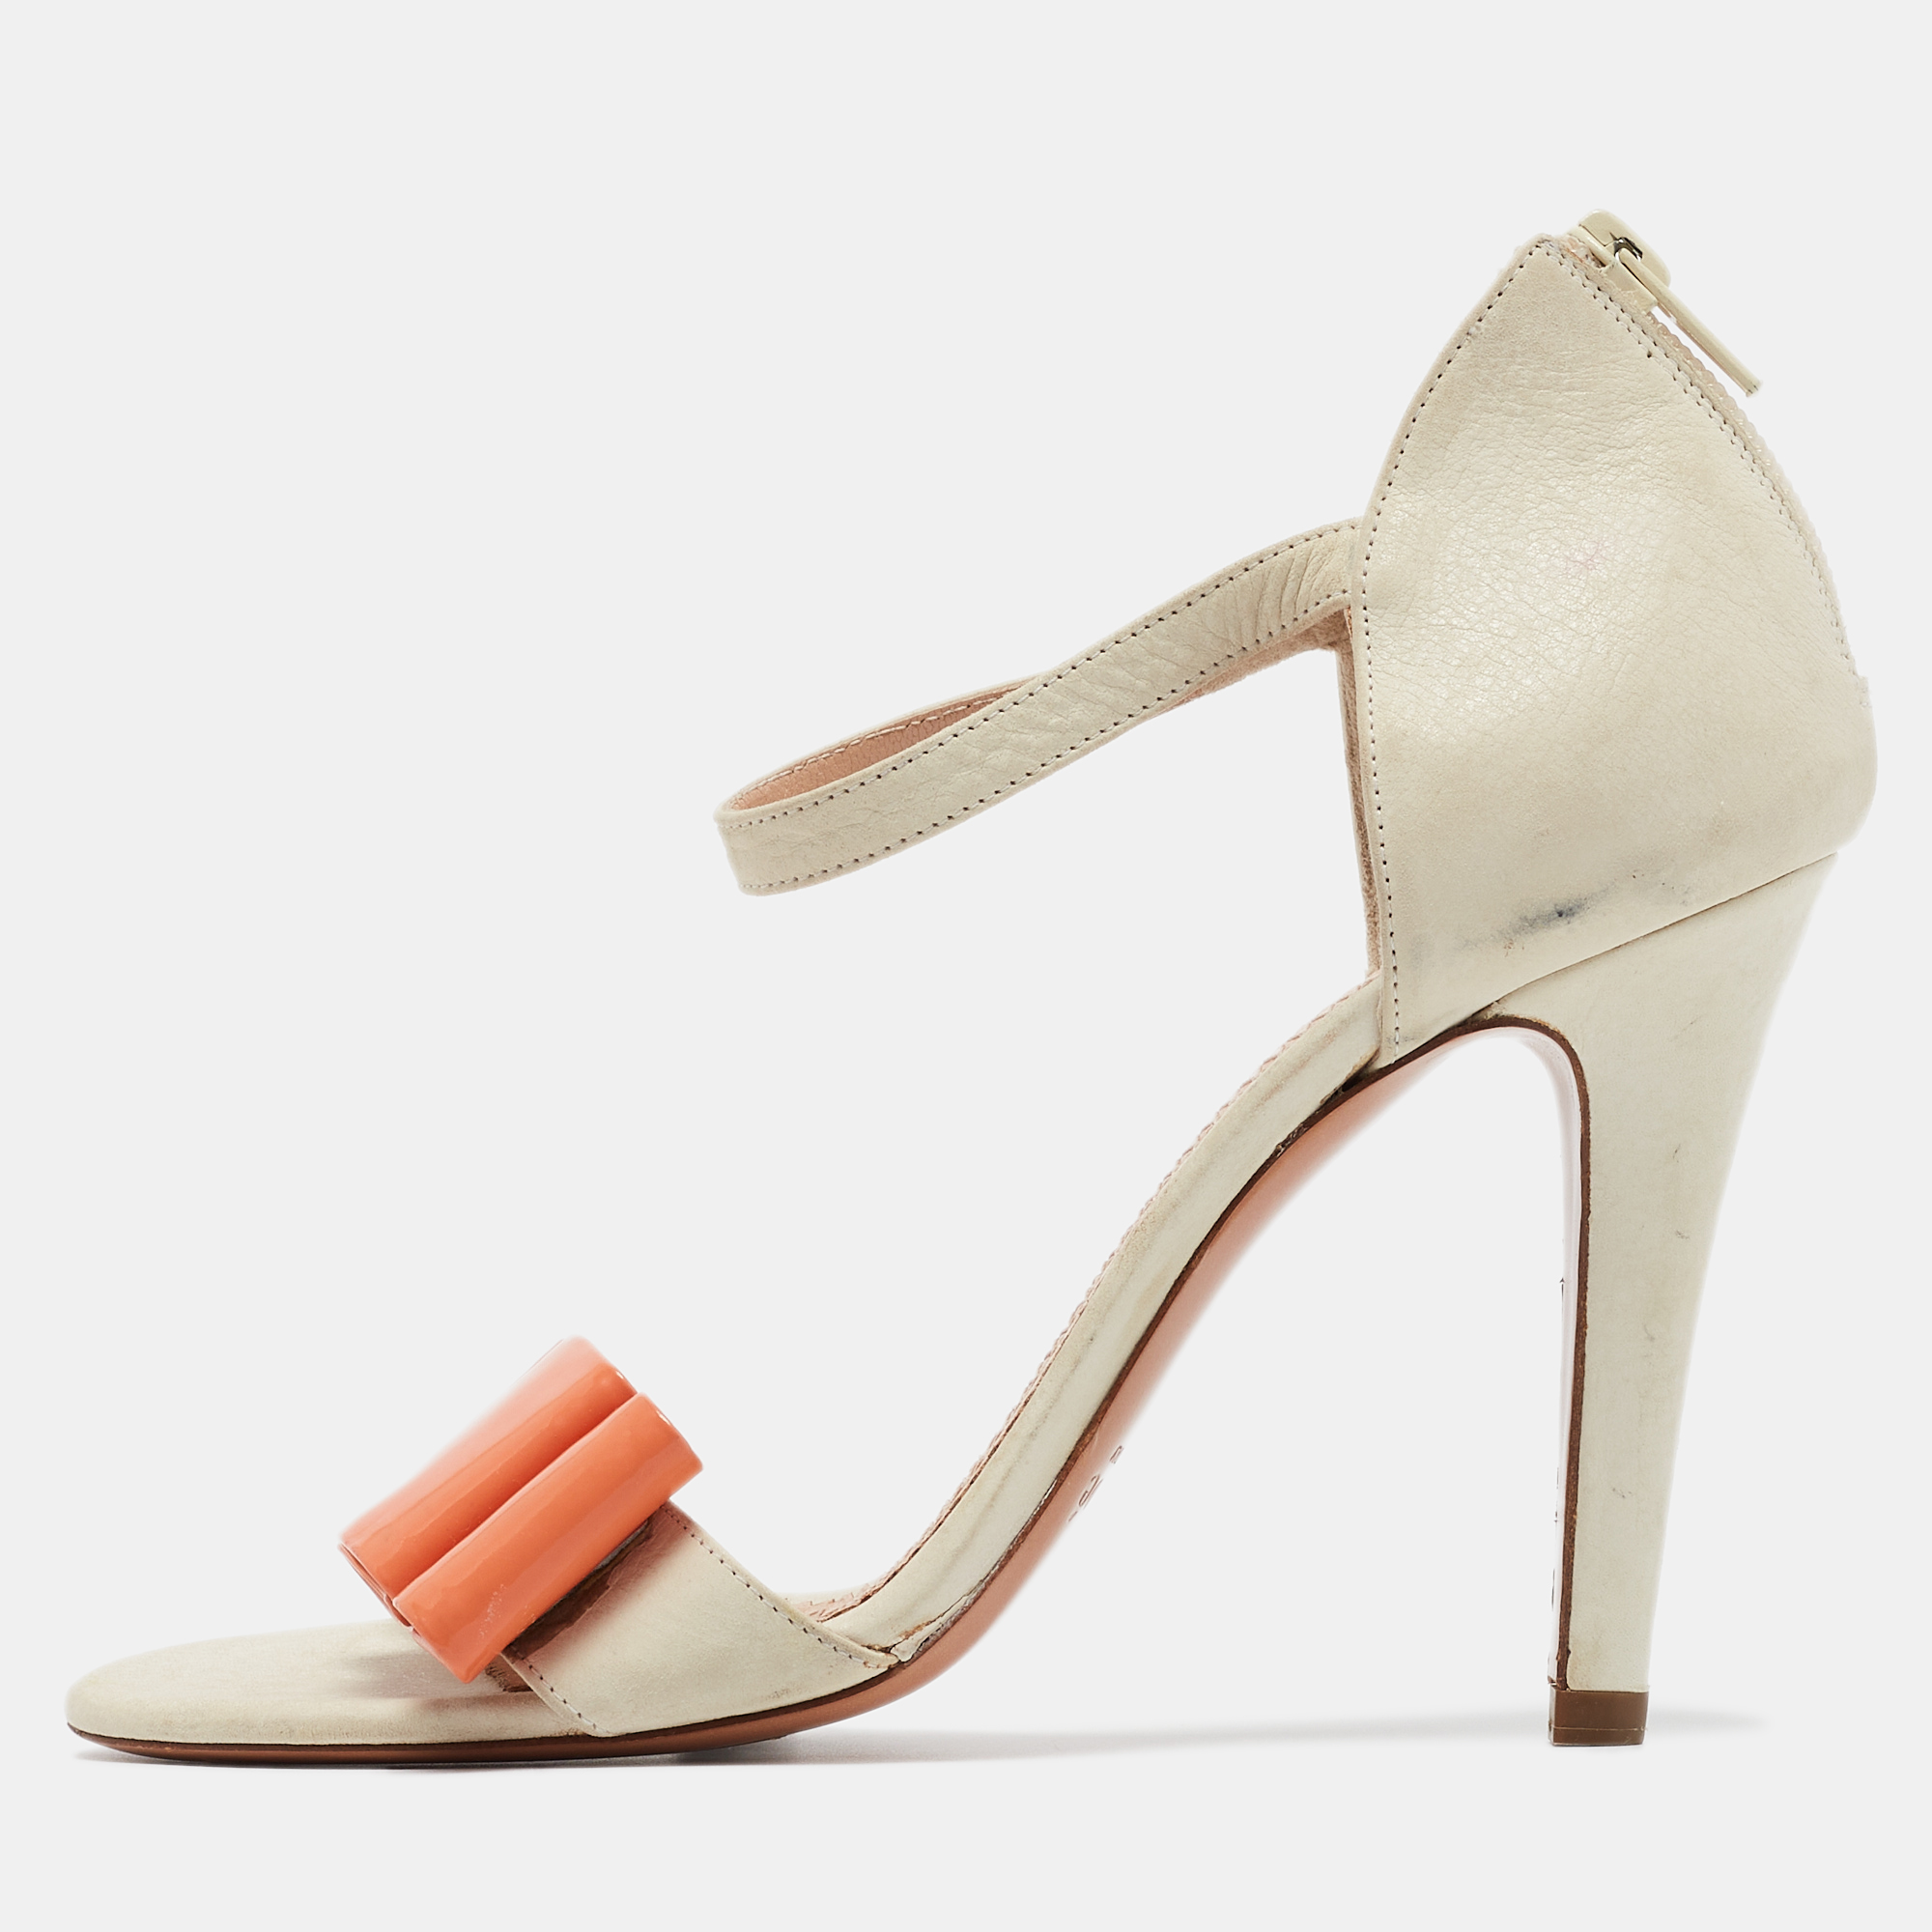 Chloe grey/orange leather and patent ankle strap sandals size 37